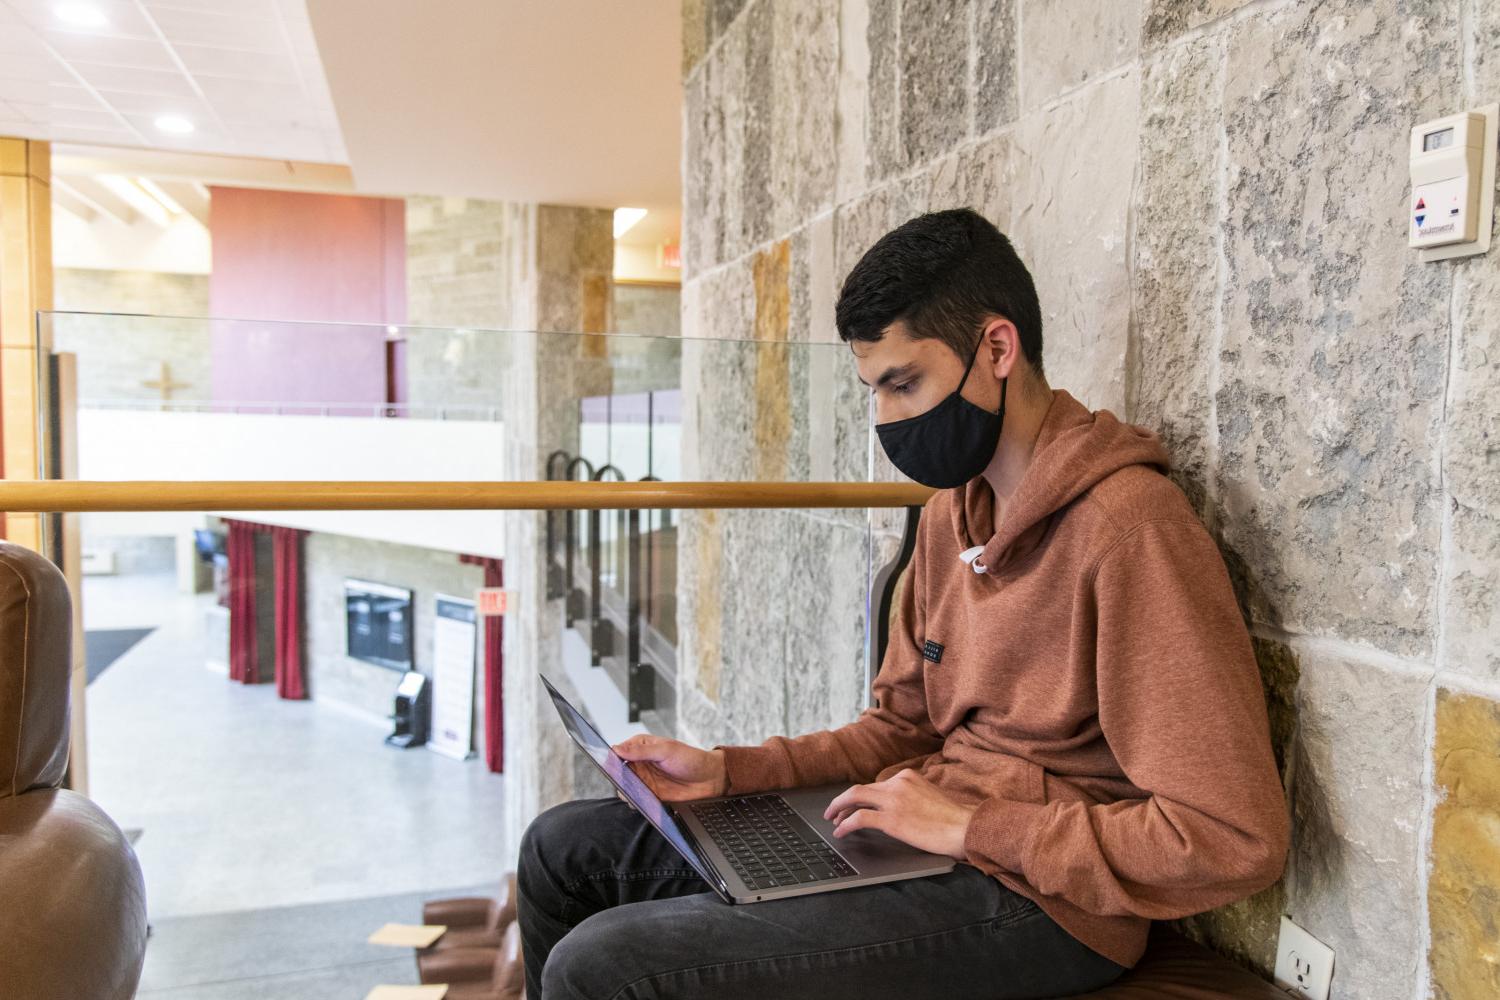 A student takes a study break between classes on the second floor of the Clausen Center.